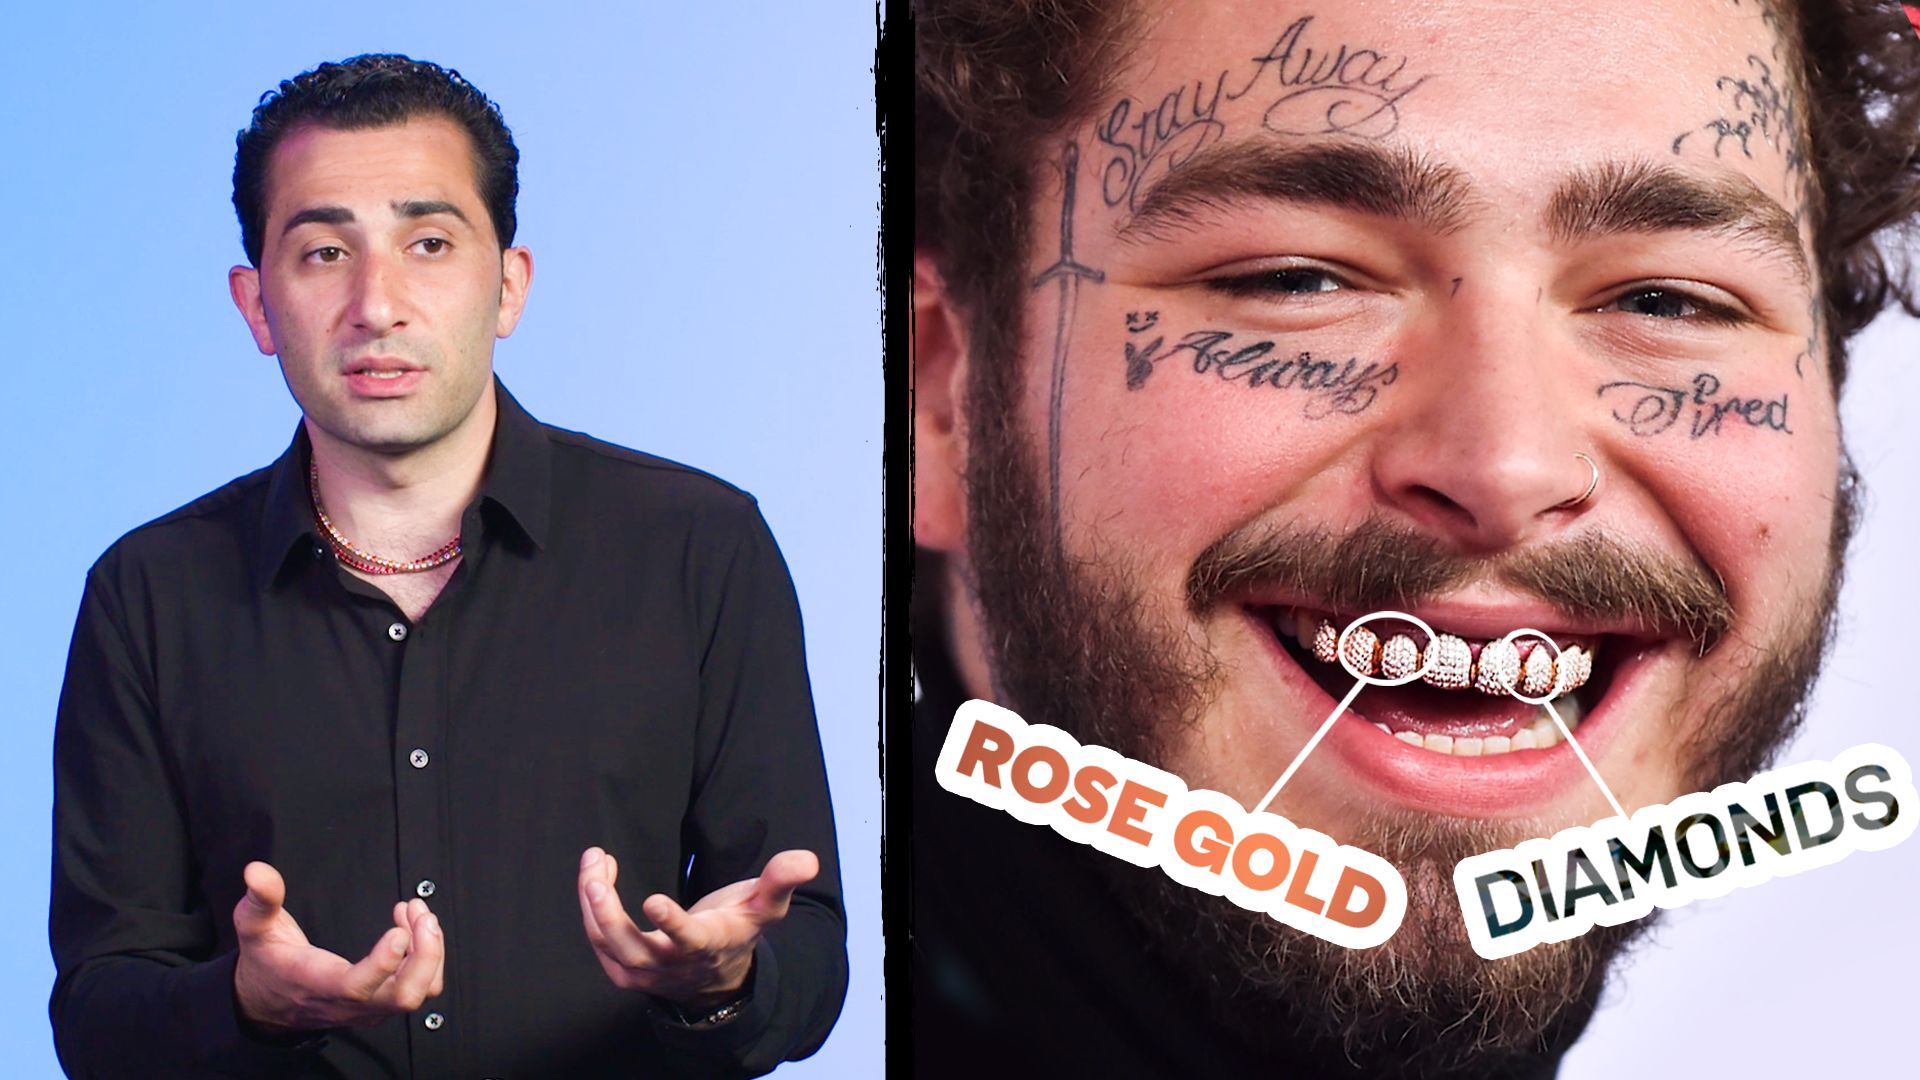 Watch Jewelry Expert Critiques Post Malone's Jewelry Collection Fine